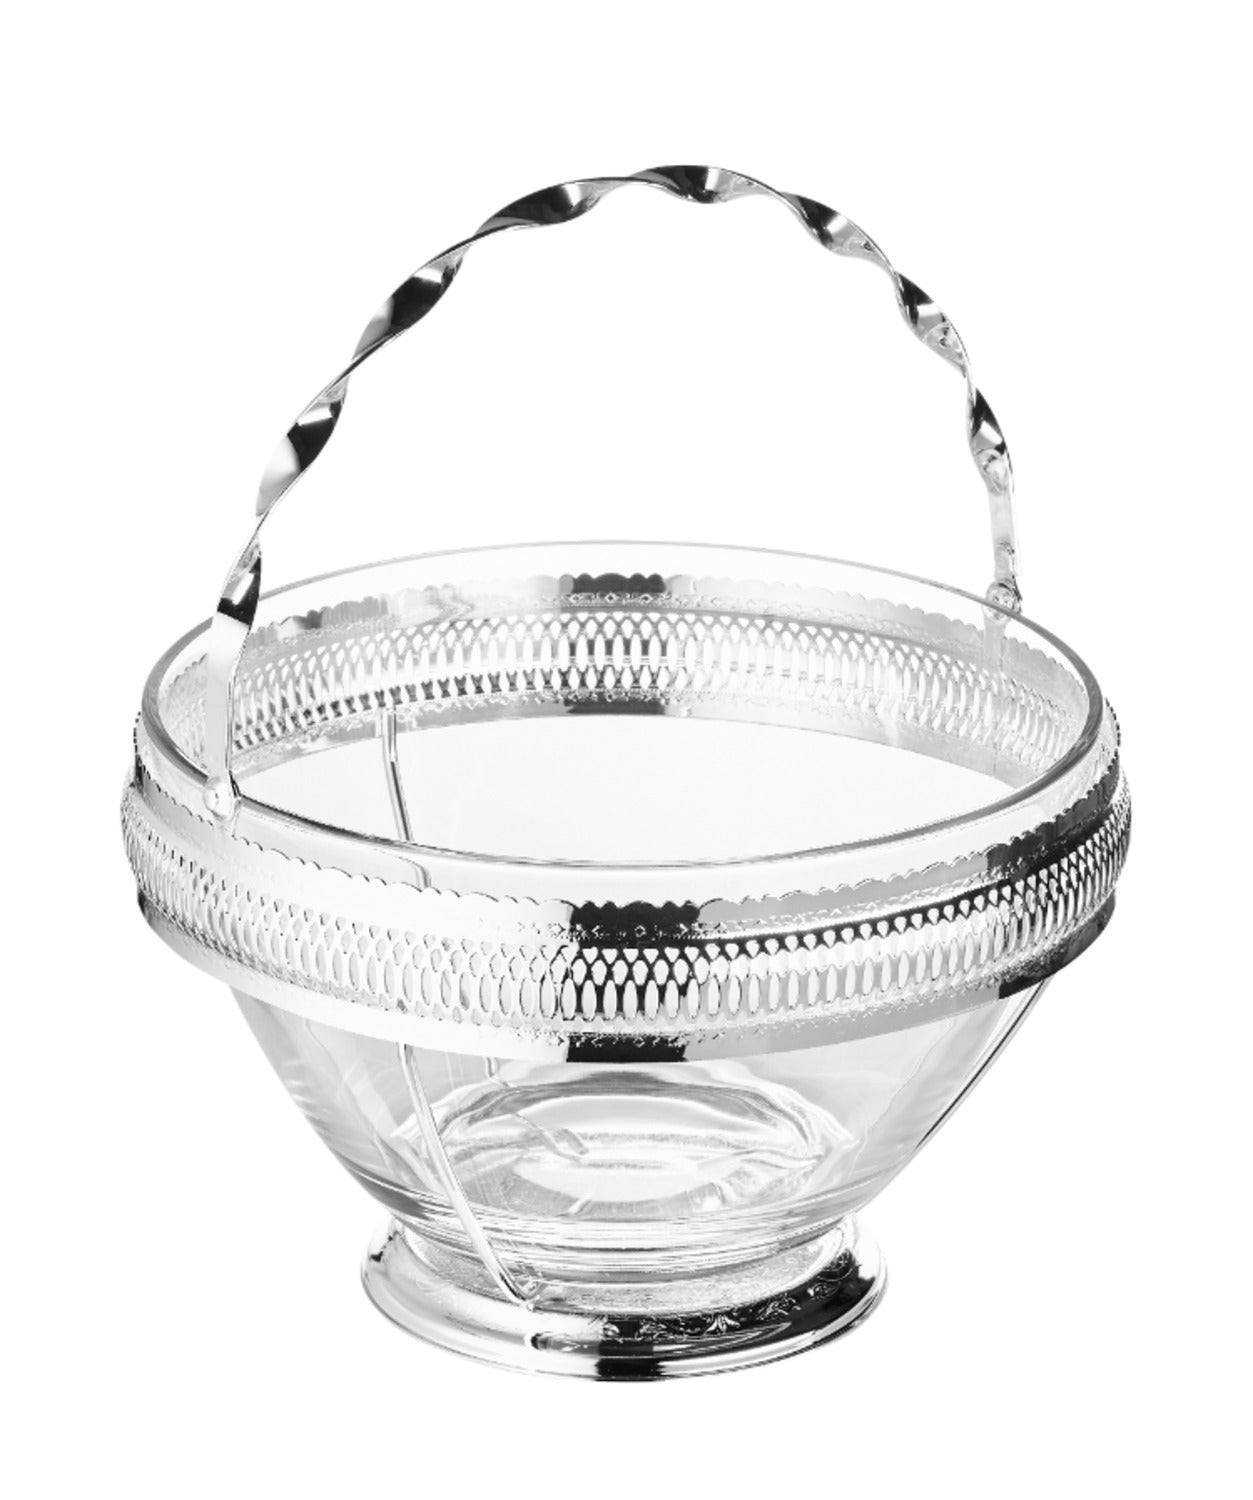 Queen Anne Large Deep Glass Fruit Bowl -24.5 Diax16.5cm -Silver Plated